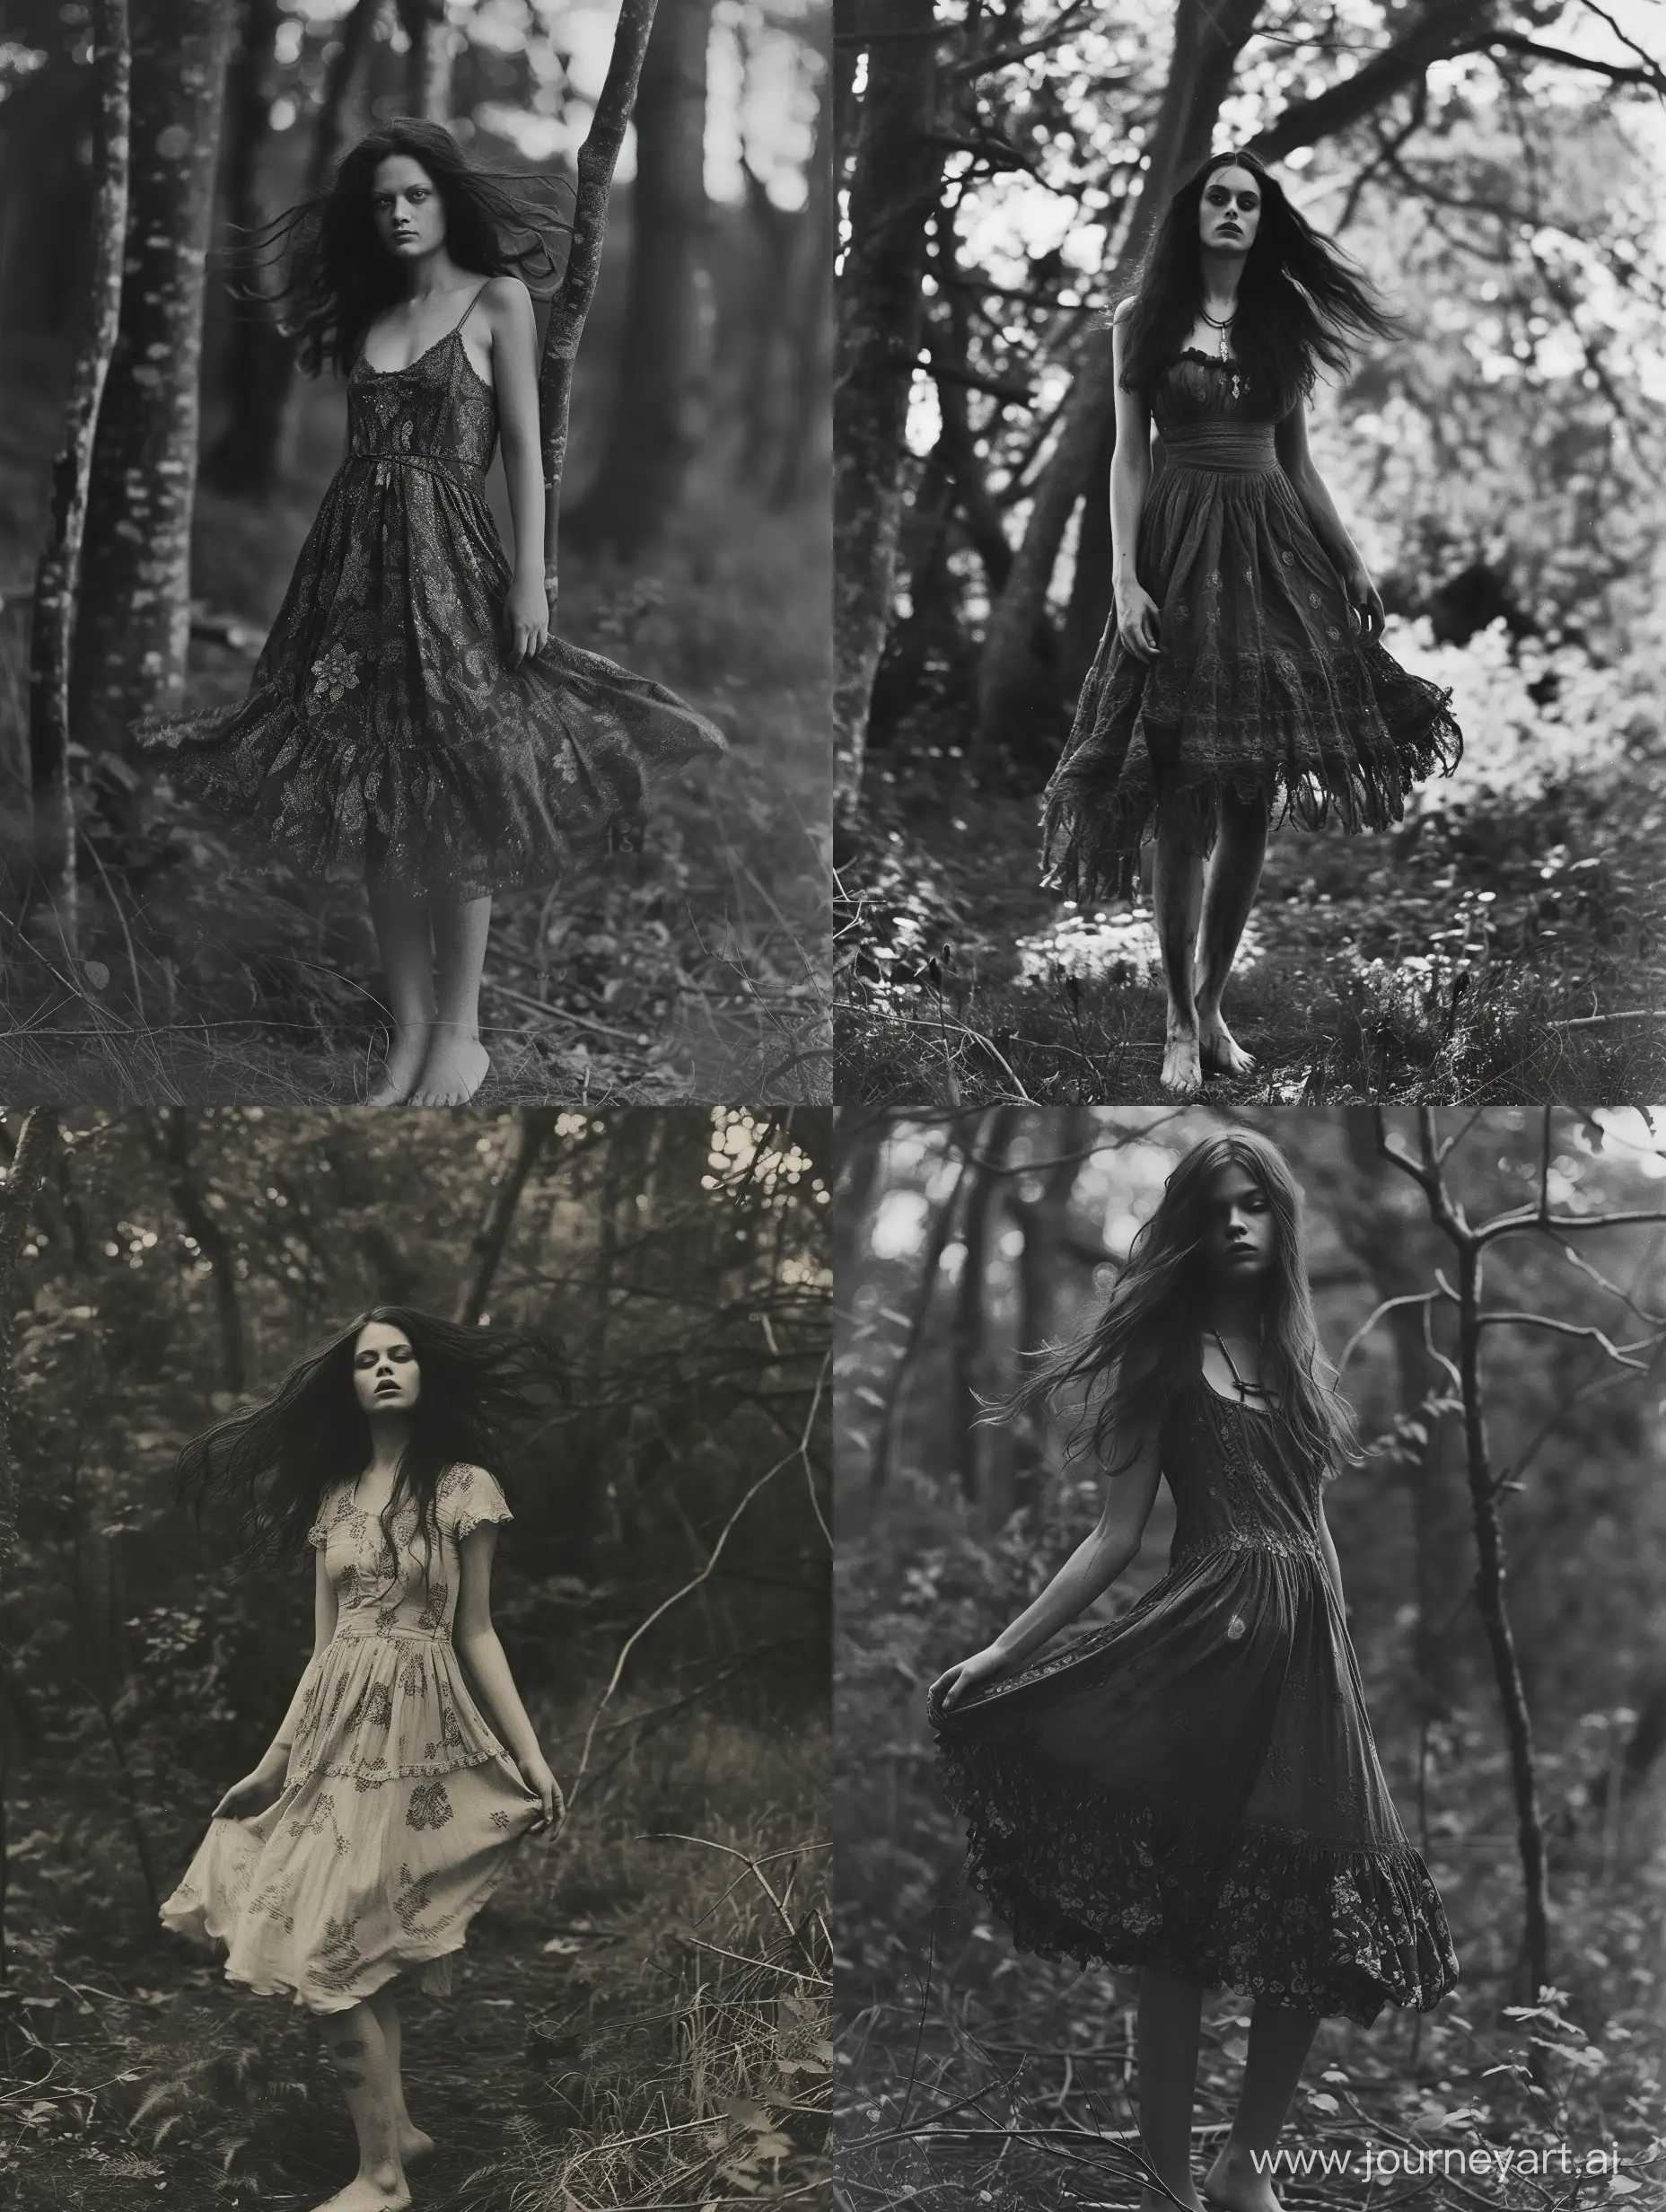 Wearing a creepy ethereal dress and barefoot, a mystical pagan woman with flowing hair stands in an eerie forest forest, evoking an aura of enchantment and dark magic, pagan horror, dark aesthetic, folk horror, grayscale, expired 35mm film 